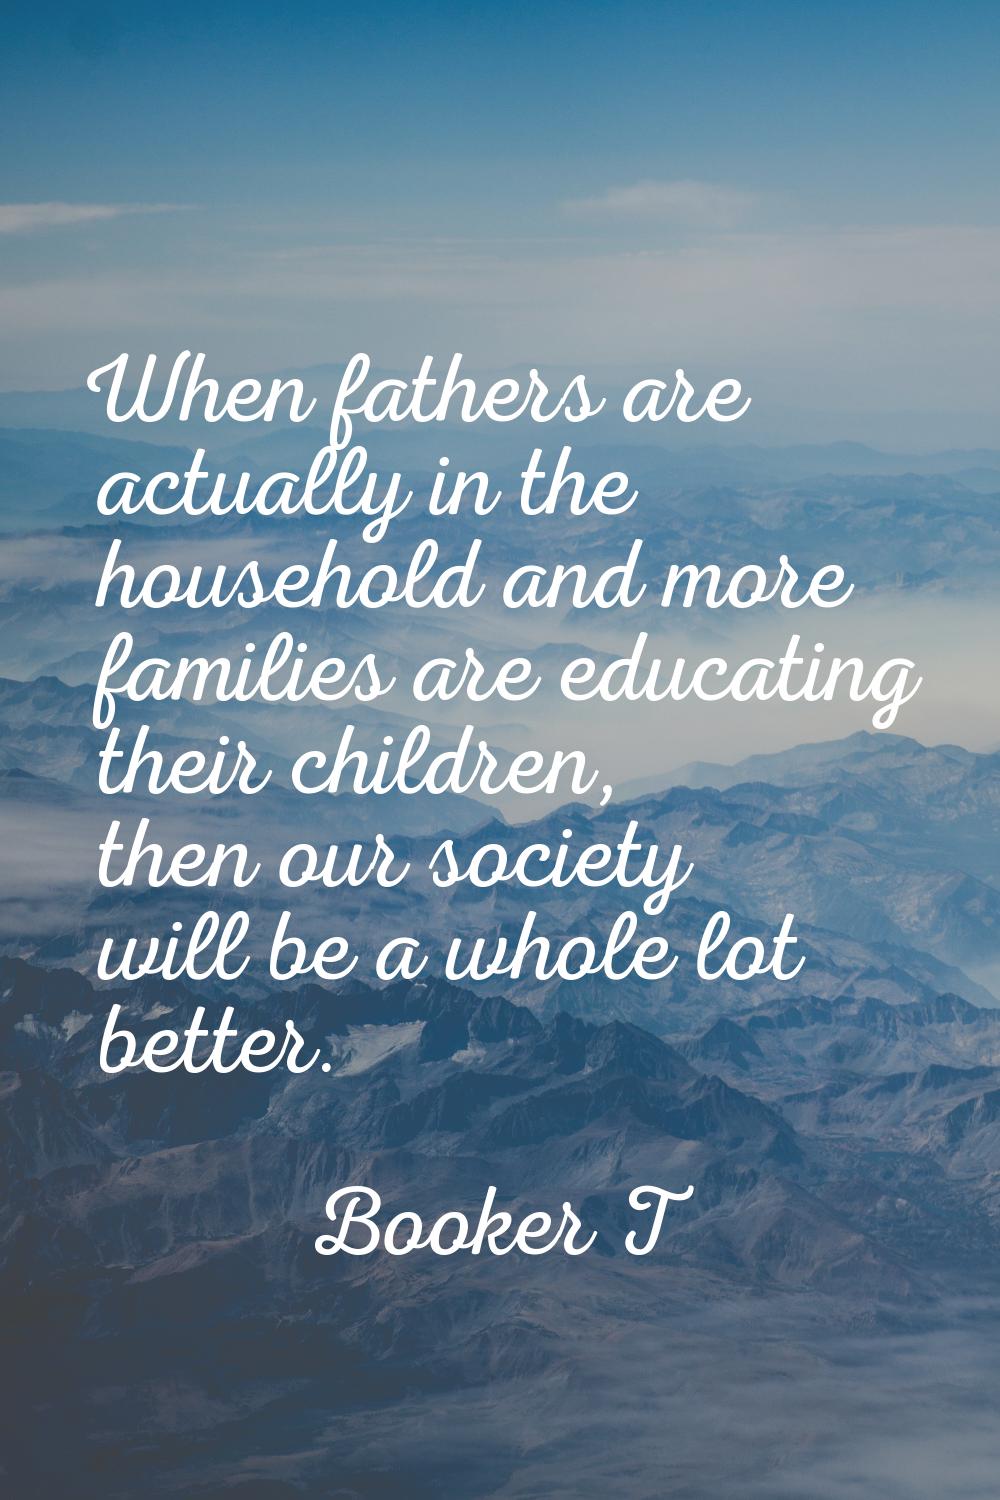 When fathers are actually in the household and more families are educating their children, then our